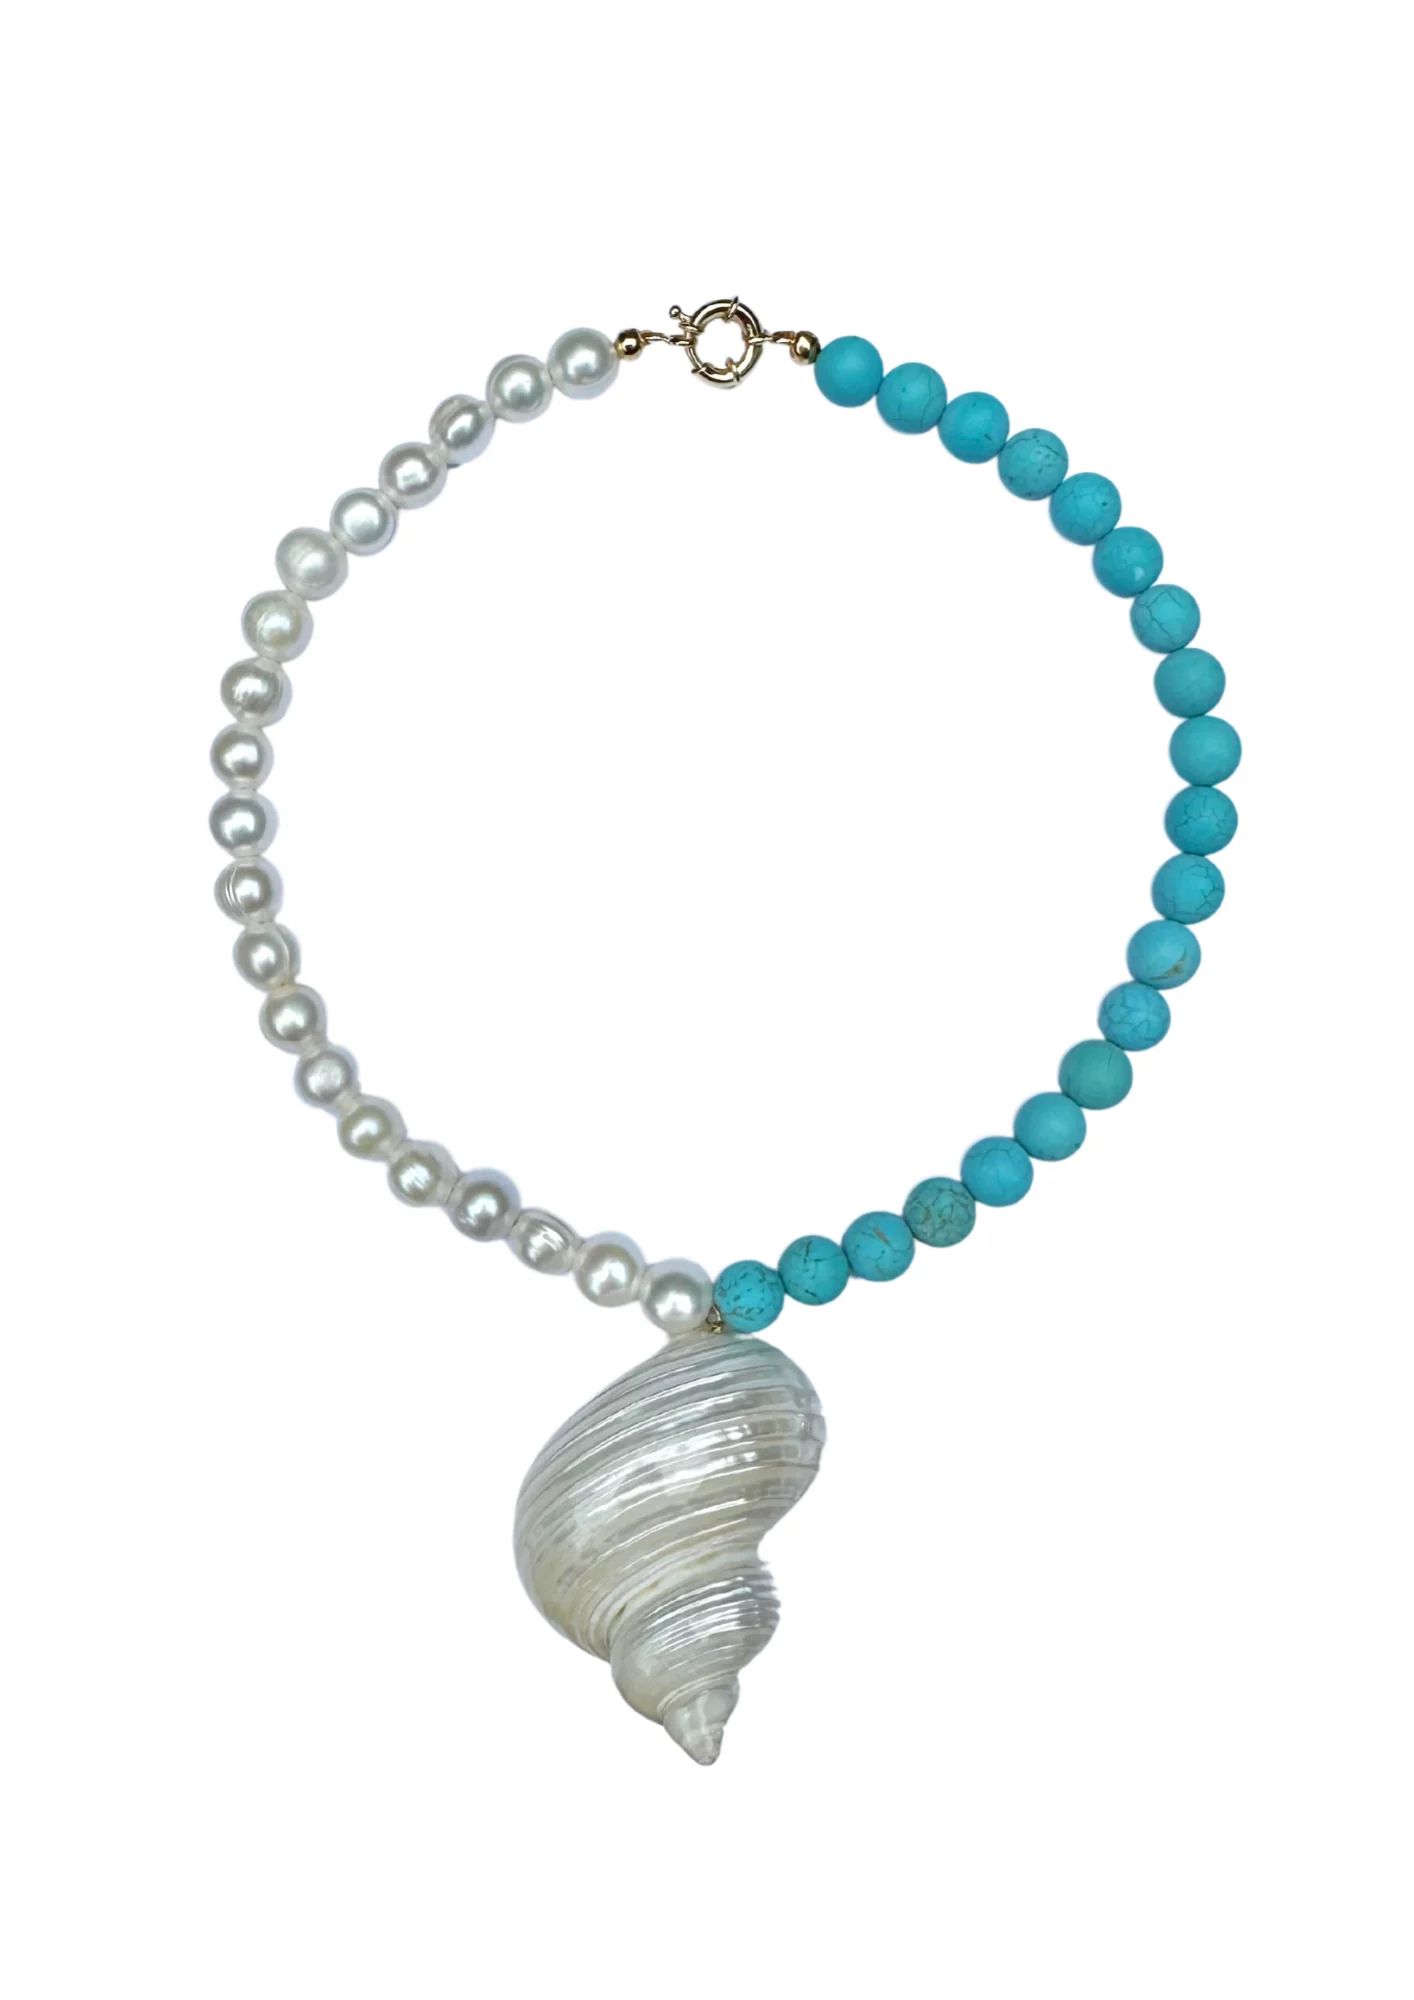 Limited Edition: Freshwater Pearl & Turquoise Seashell Necklace | Nicola Bathie Jewelry